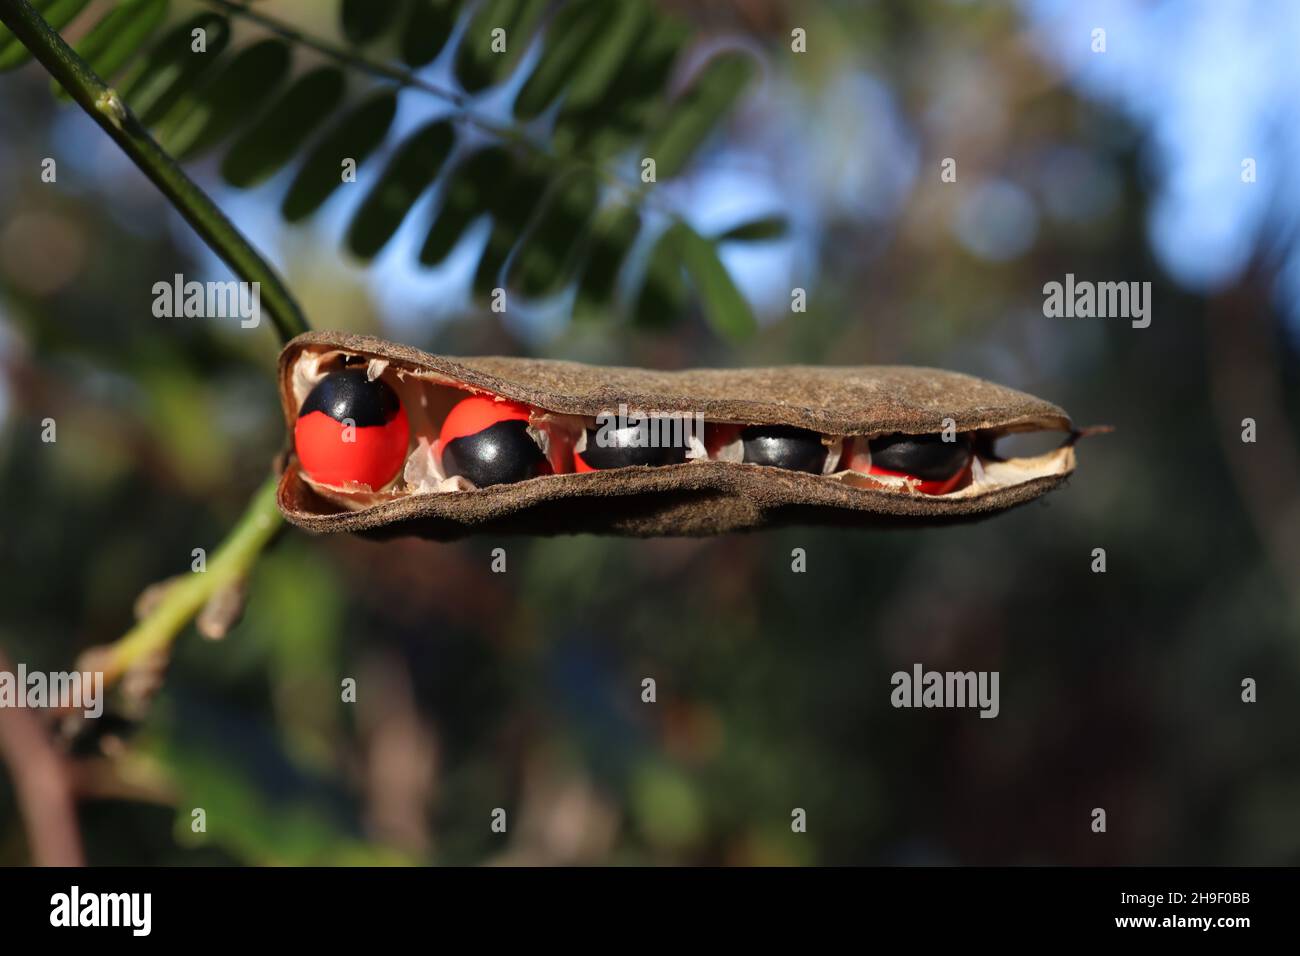 Rosary pea or abrus precatorius red and black seeds in pod Stock Photo